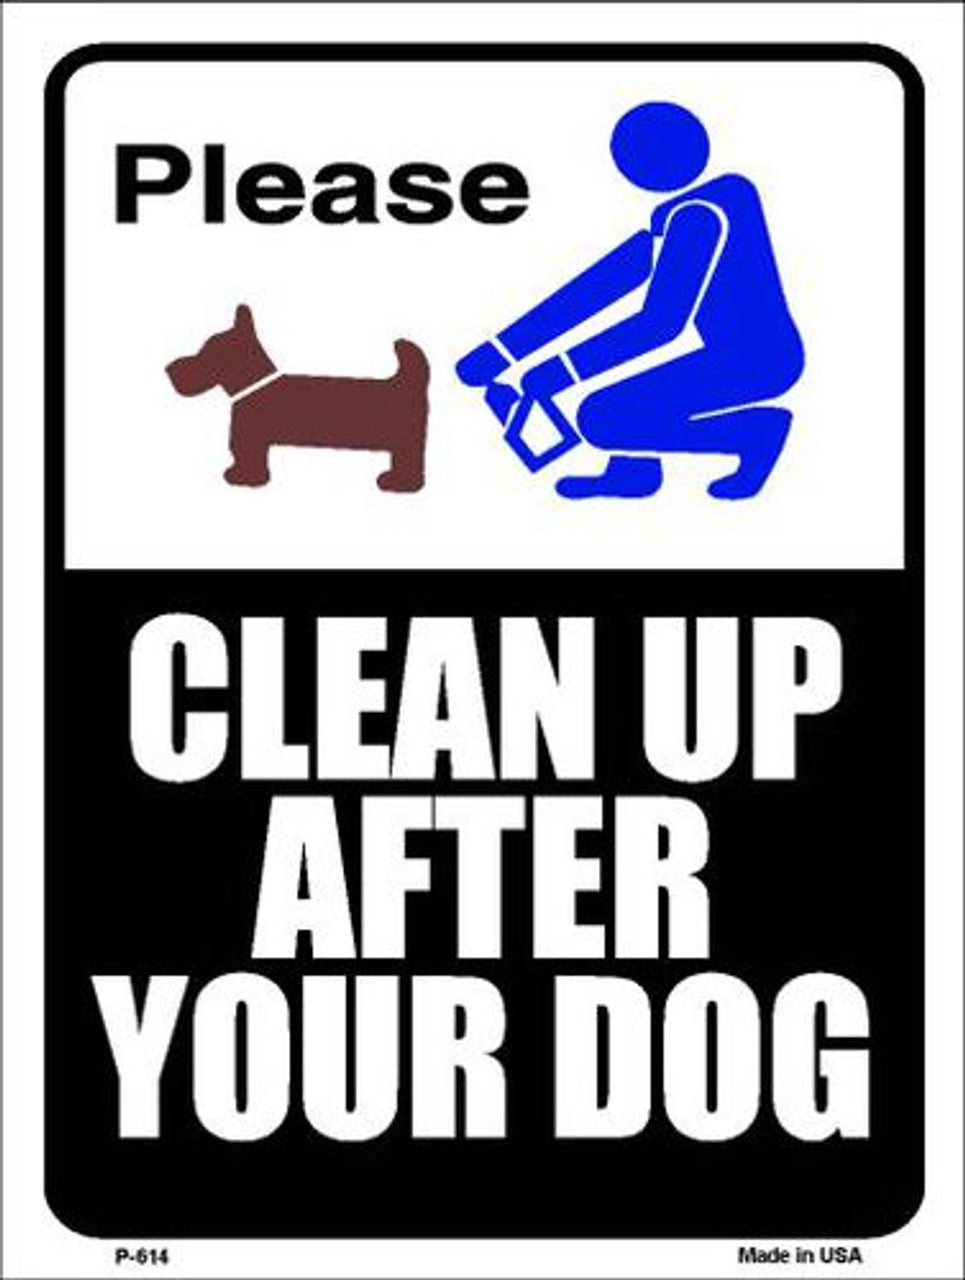 "Clean After Your Dog" Metal Parking Sign - 9" x 12", Weather Resistant, High-Quality Aluminum, Pre-drilled Holes, Made in USA. Easy to mount.